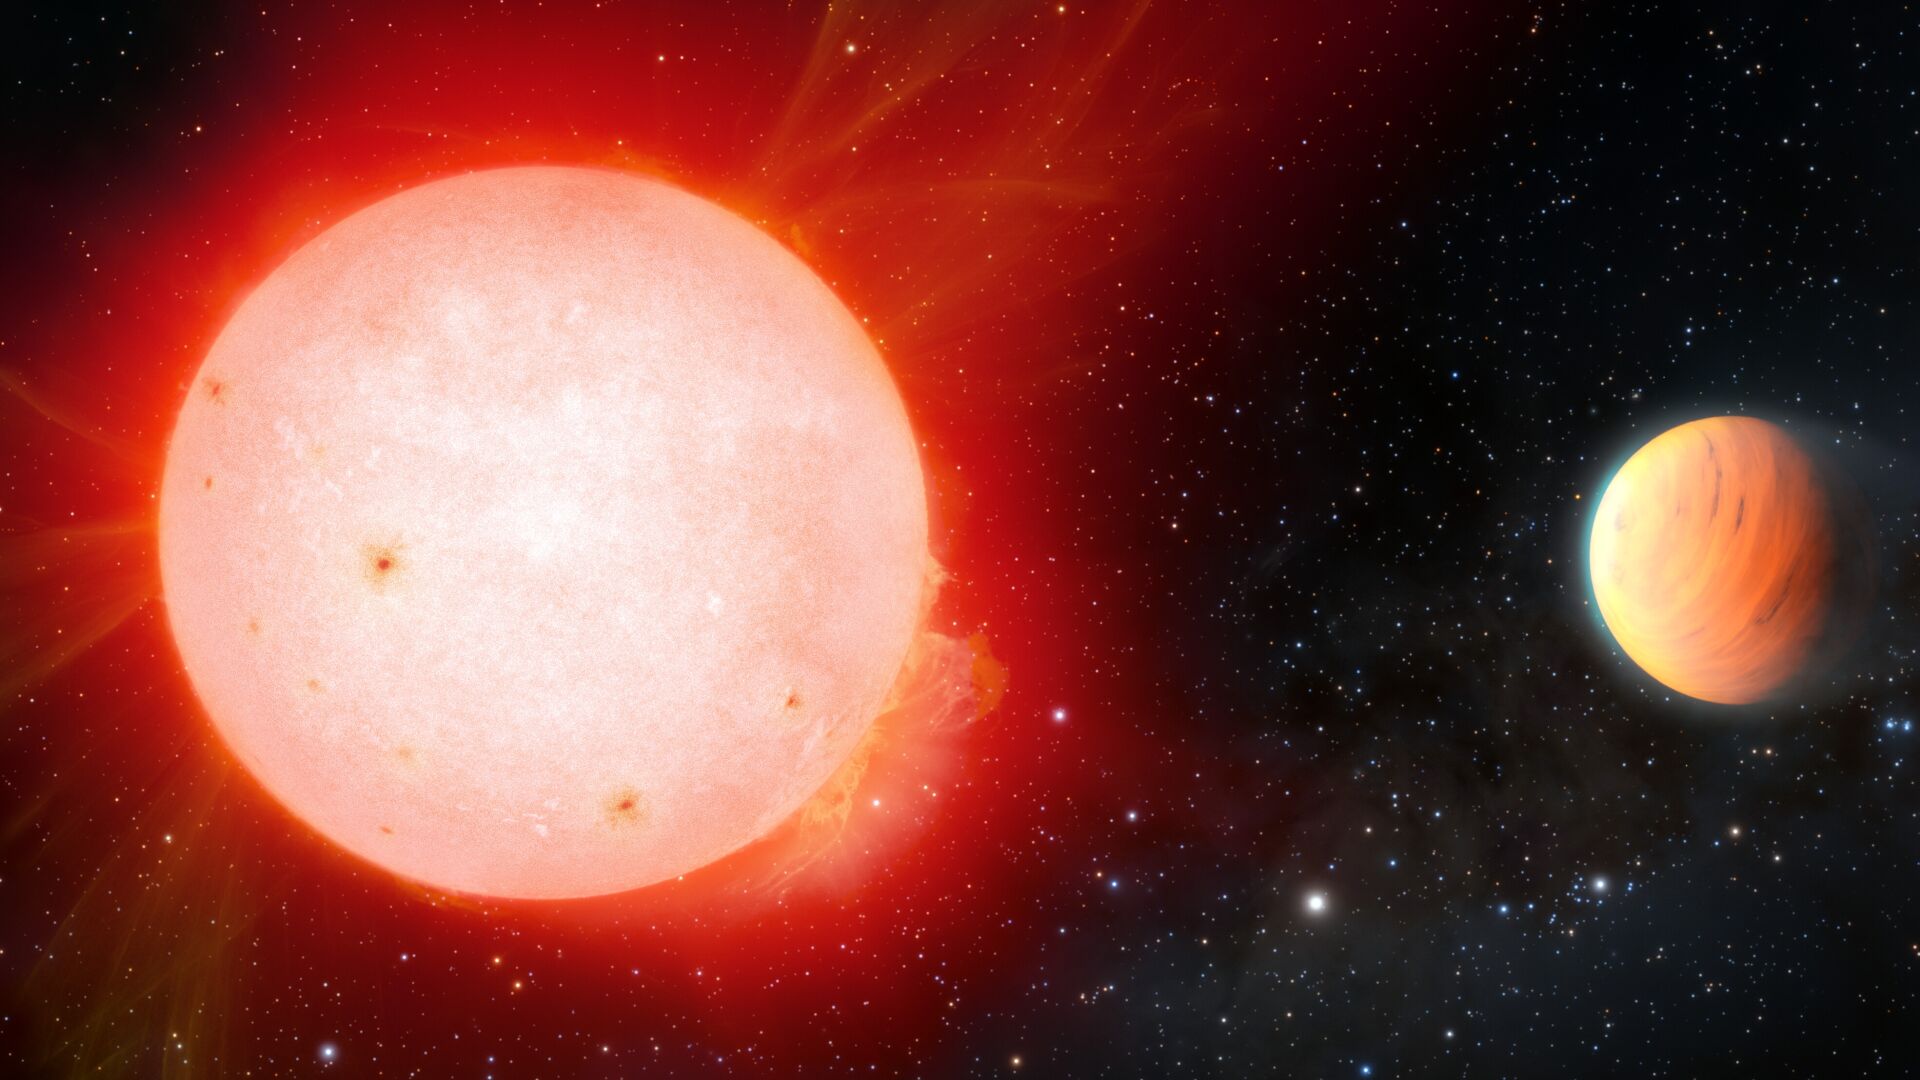 Planet with density of marshmallow discovered orbiting red dwarf Trending fox23